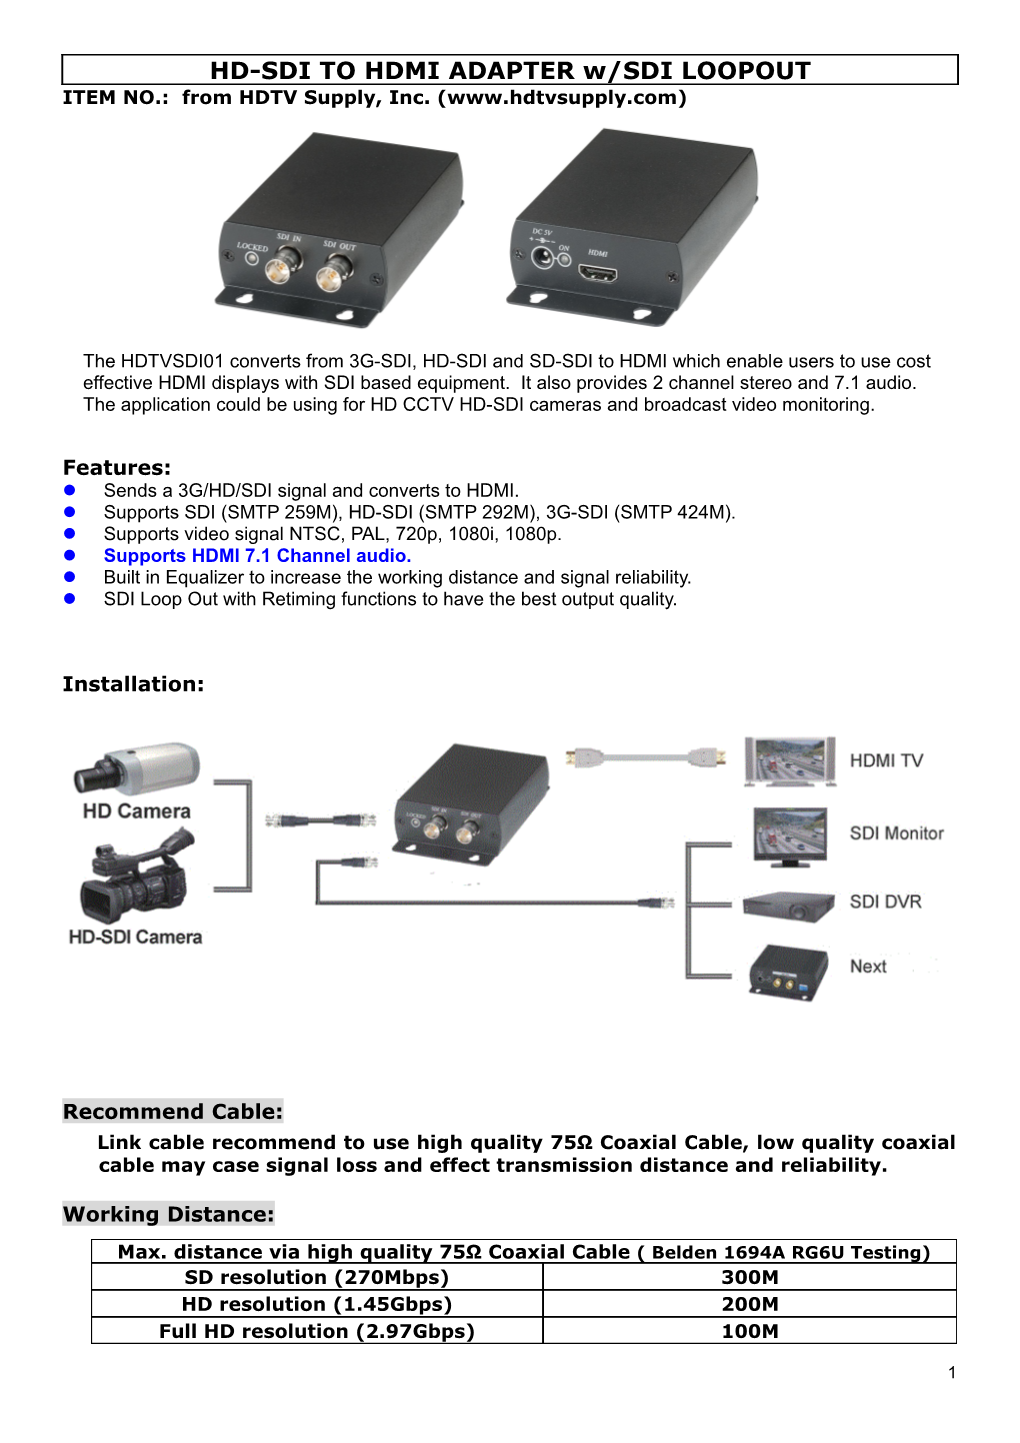 Twisted Pair Transmision System s2